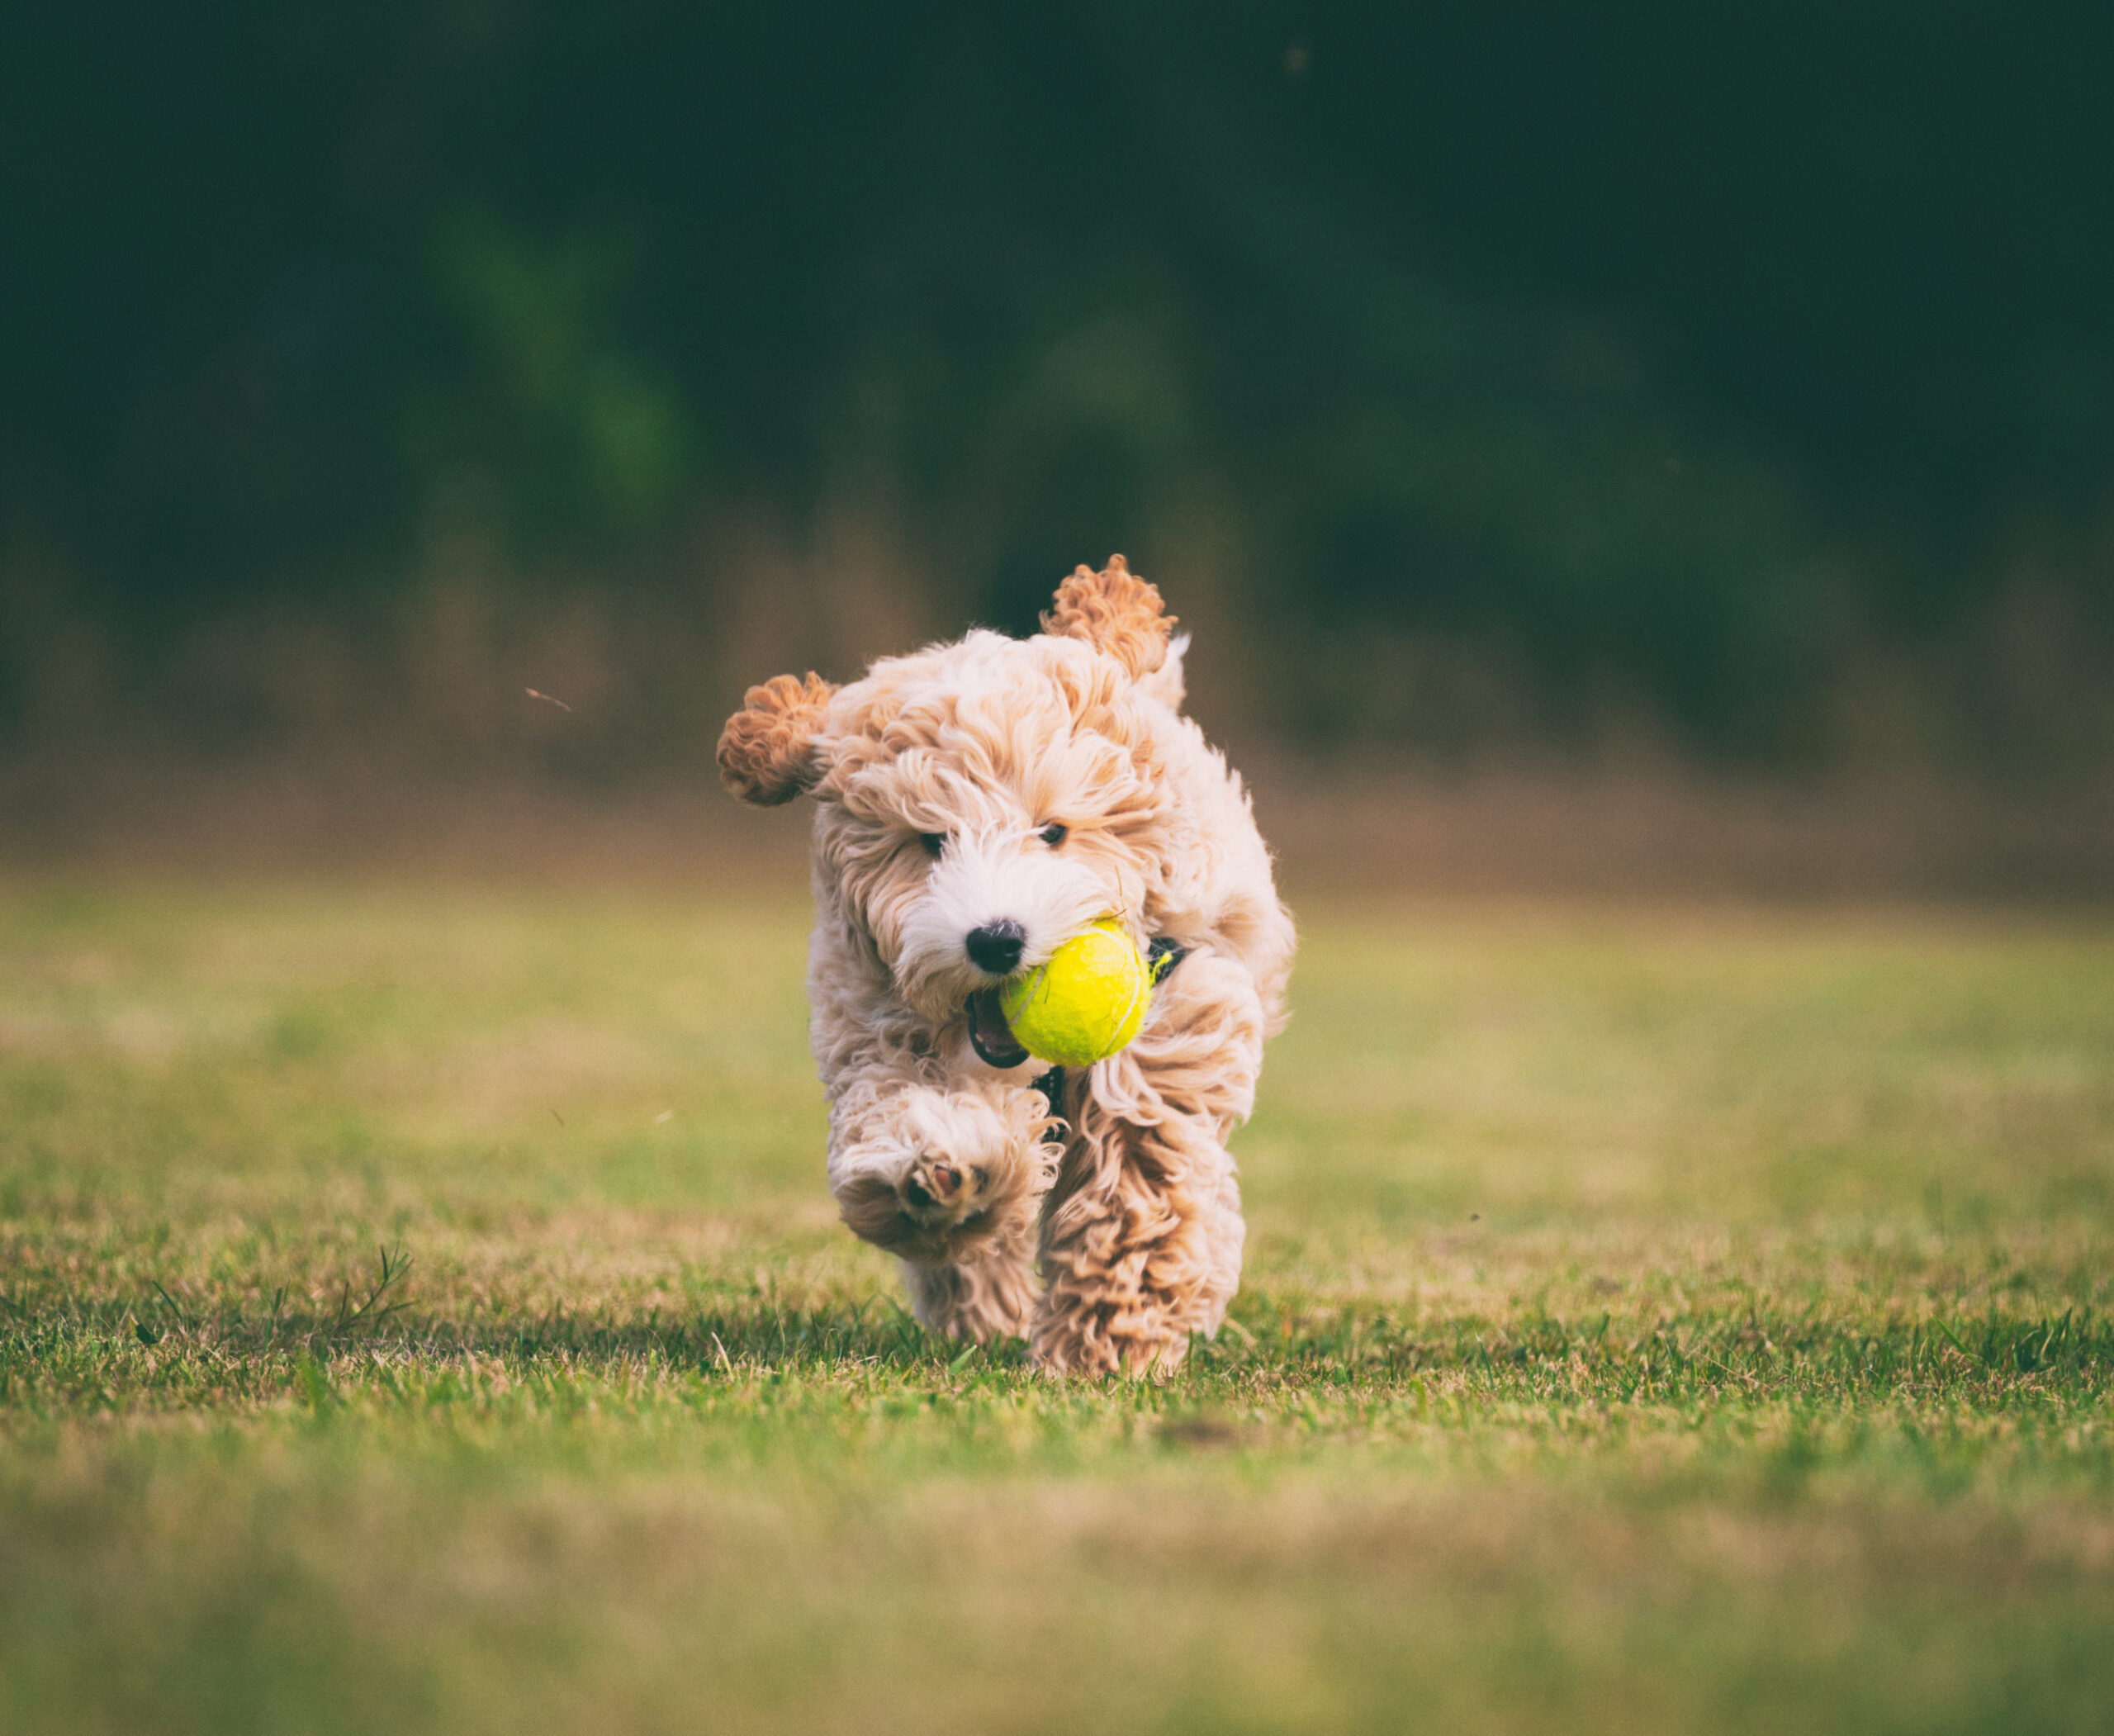 How much exercise does your dog need?